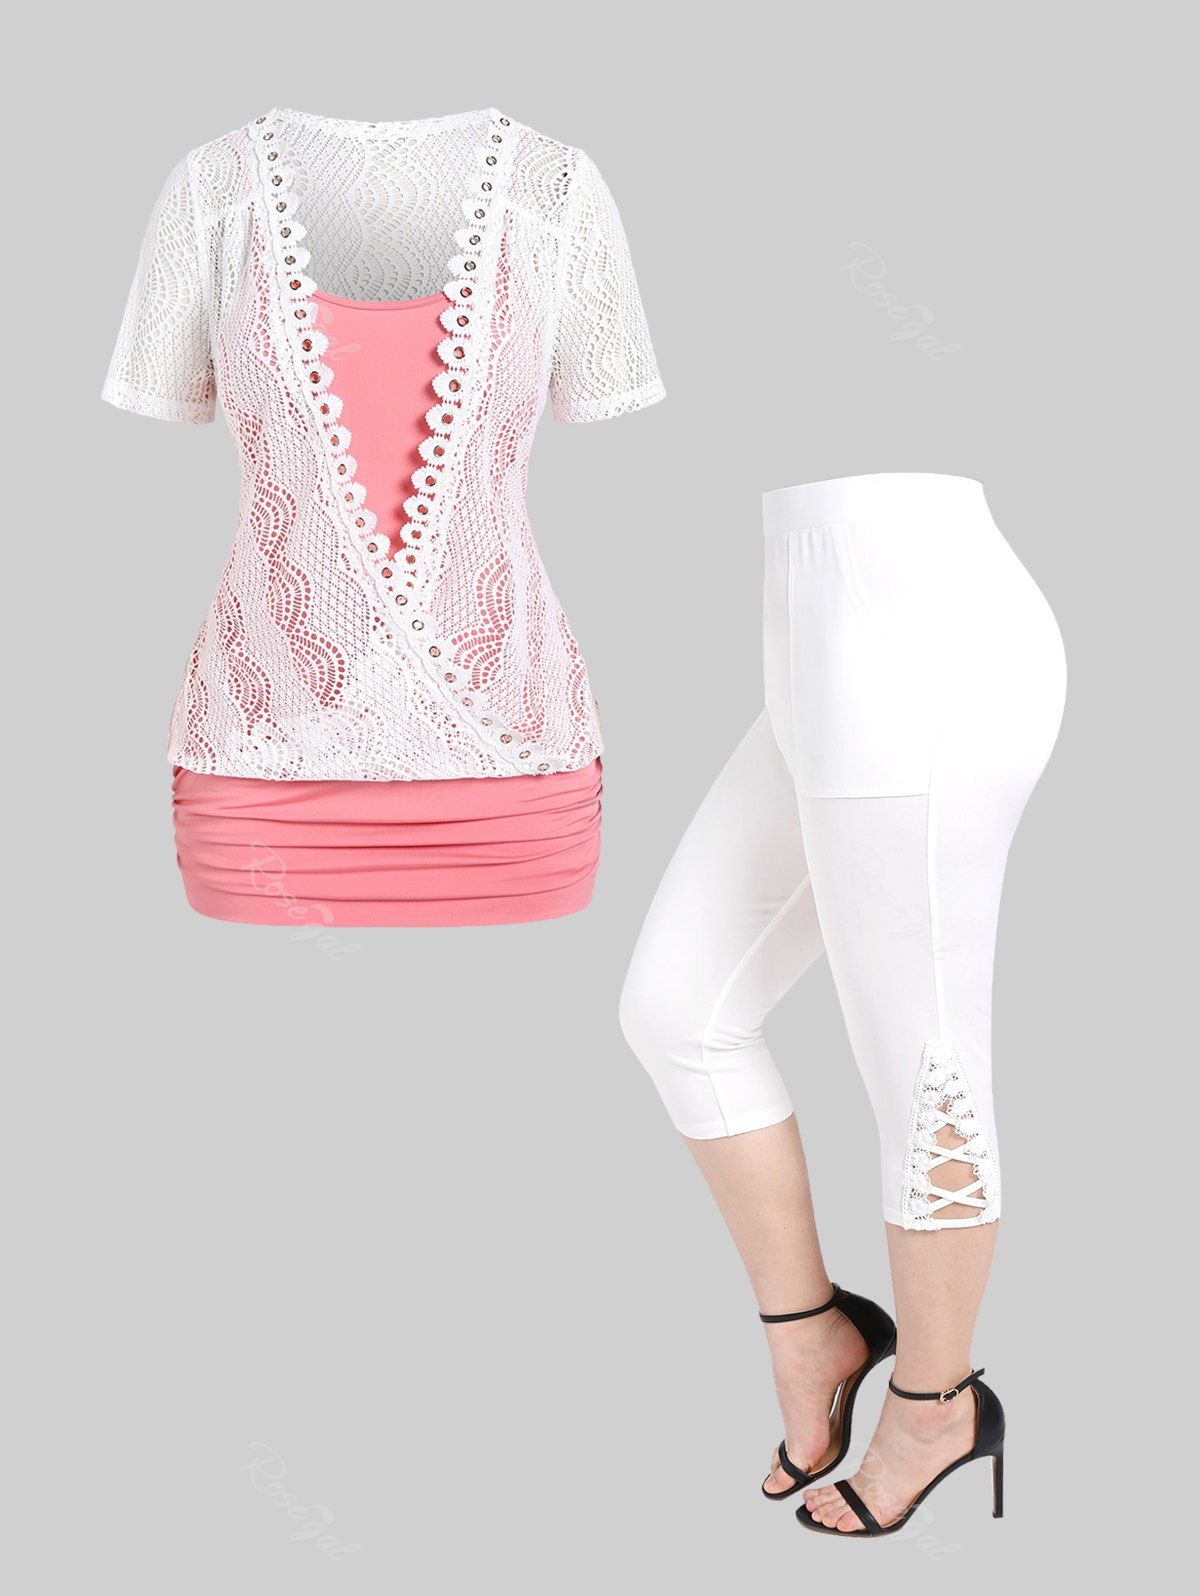 Cheap Lace Panel Two Tone 2 in 1 Tunic Top and Pockets Capri Leggings Plus Size Summer Outfit  